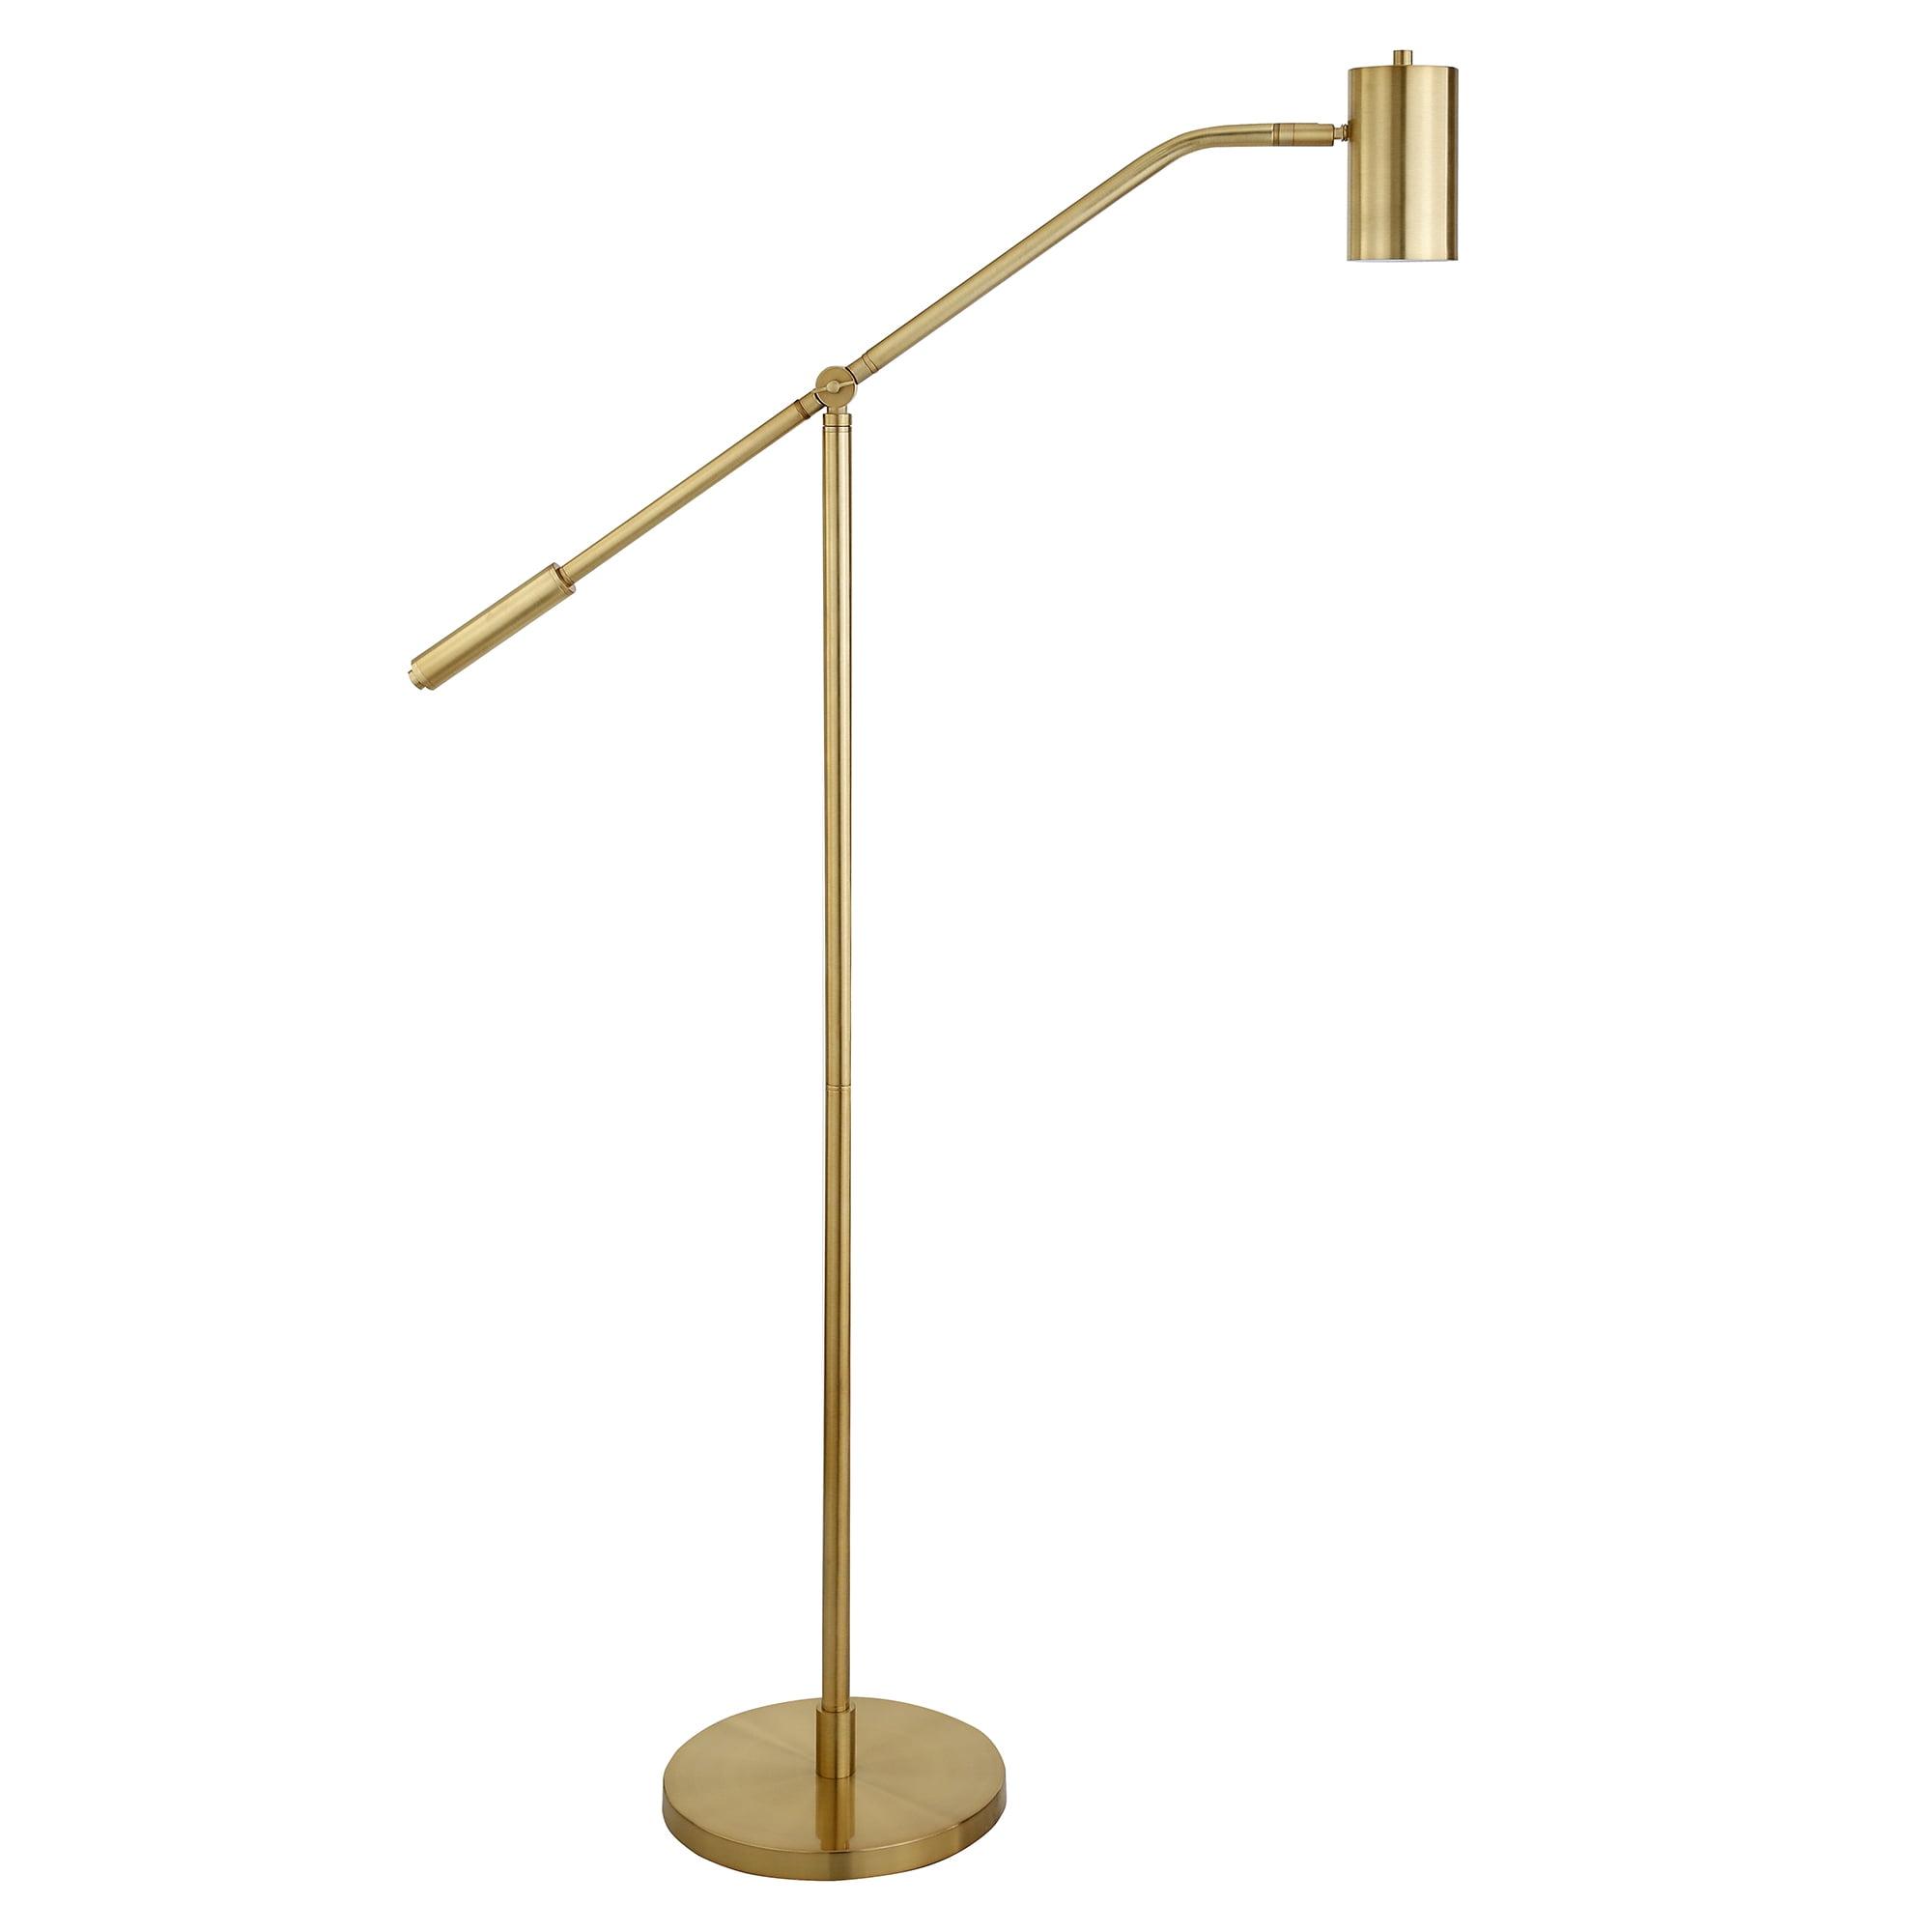 Adjustable Brass Pharmacy Floor Lamp with Smart Assistant Compatibility